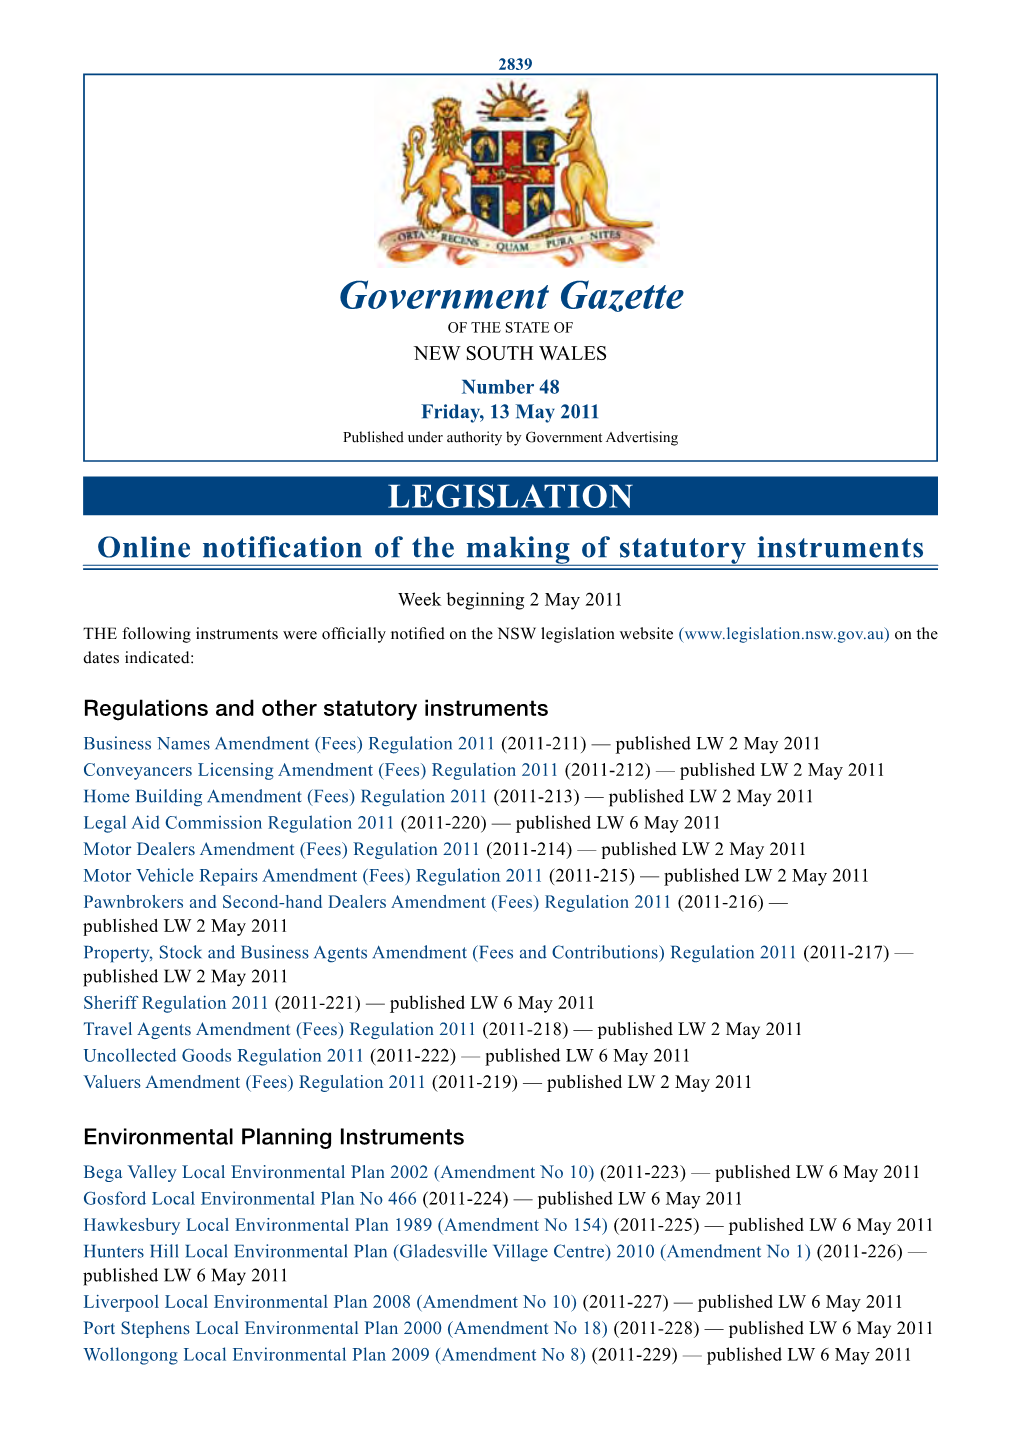 Government Gazette of 13 May 2011